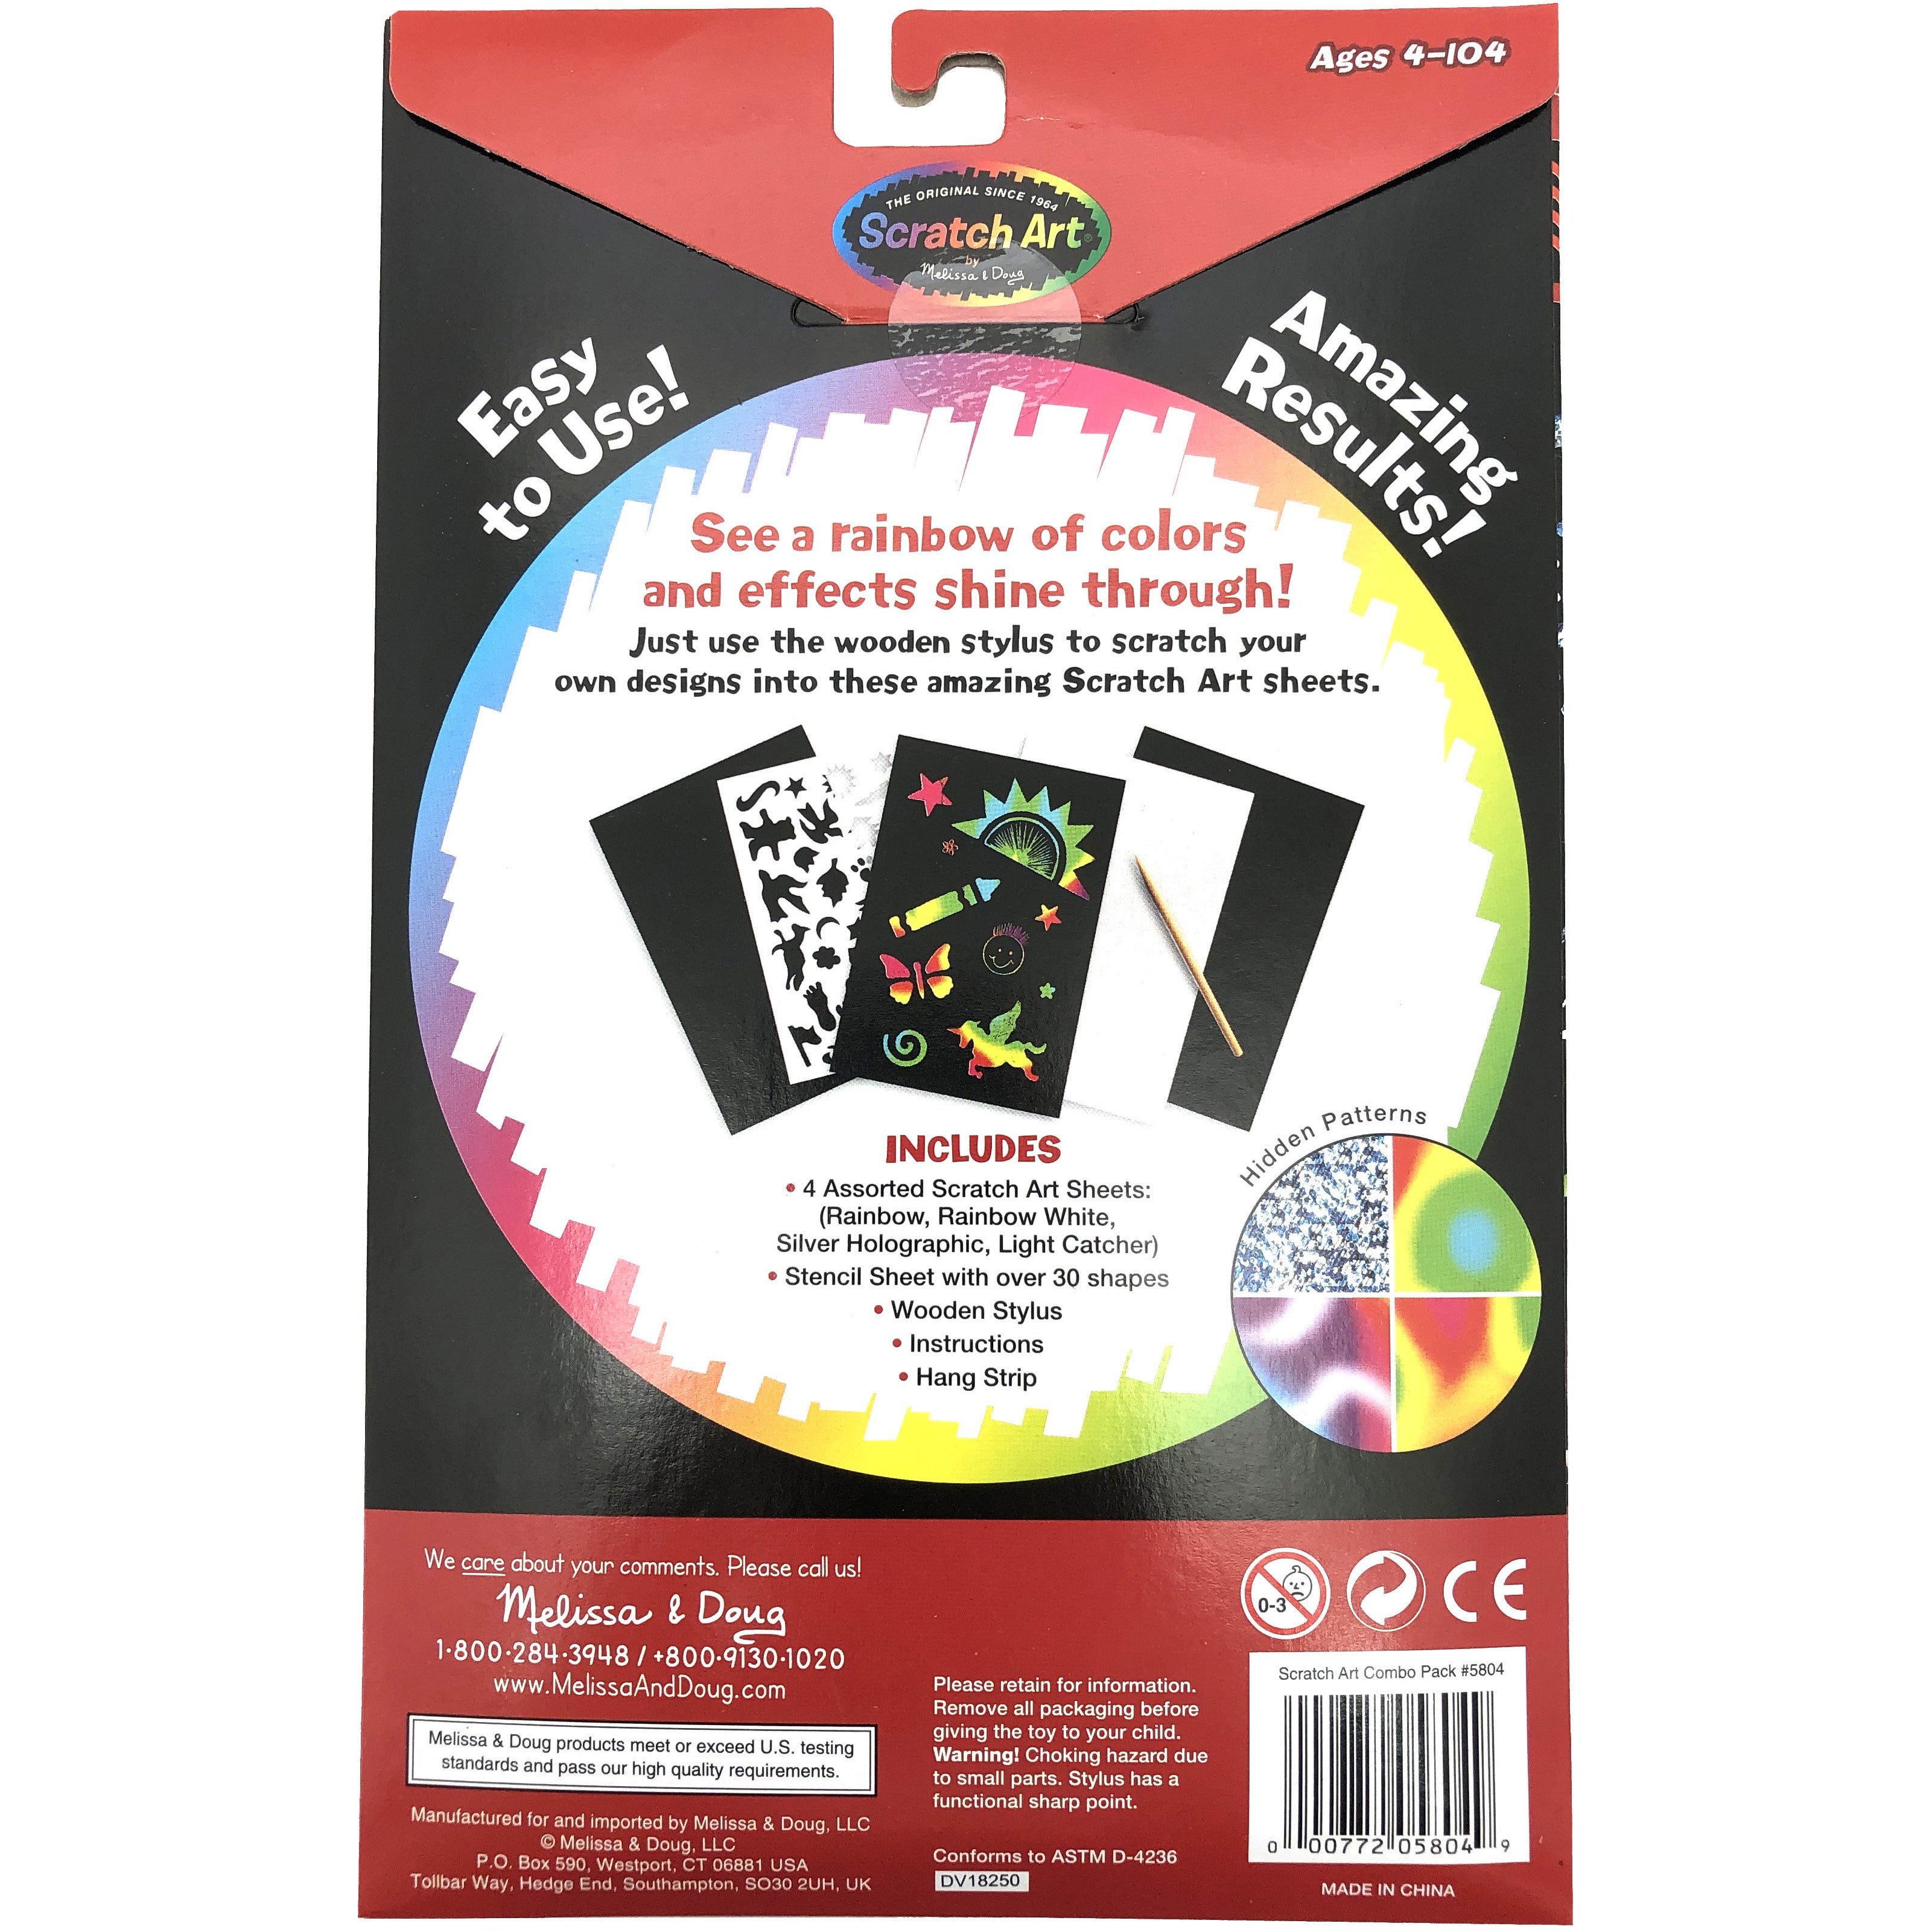 melissa and doug Scratch art combo pack in a bundle of 6 for kids parties